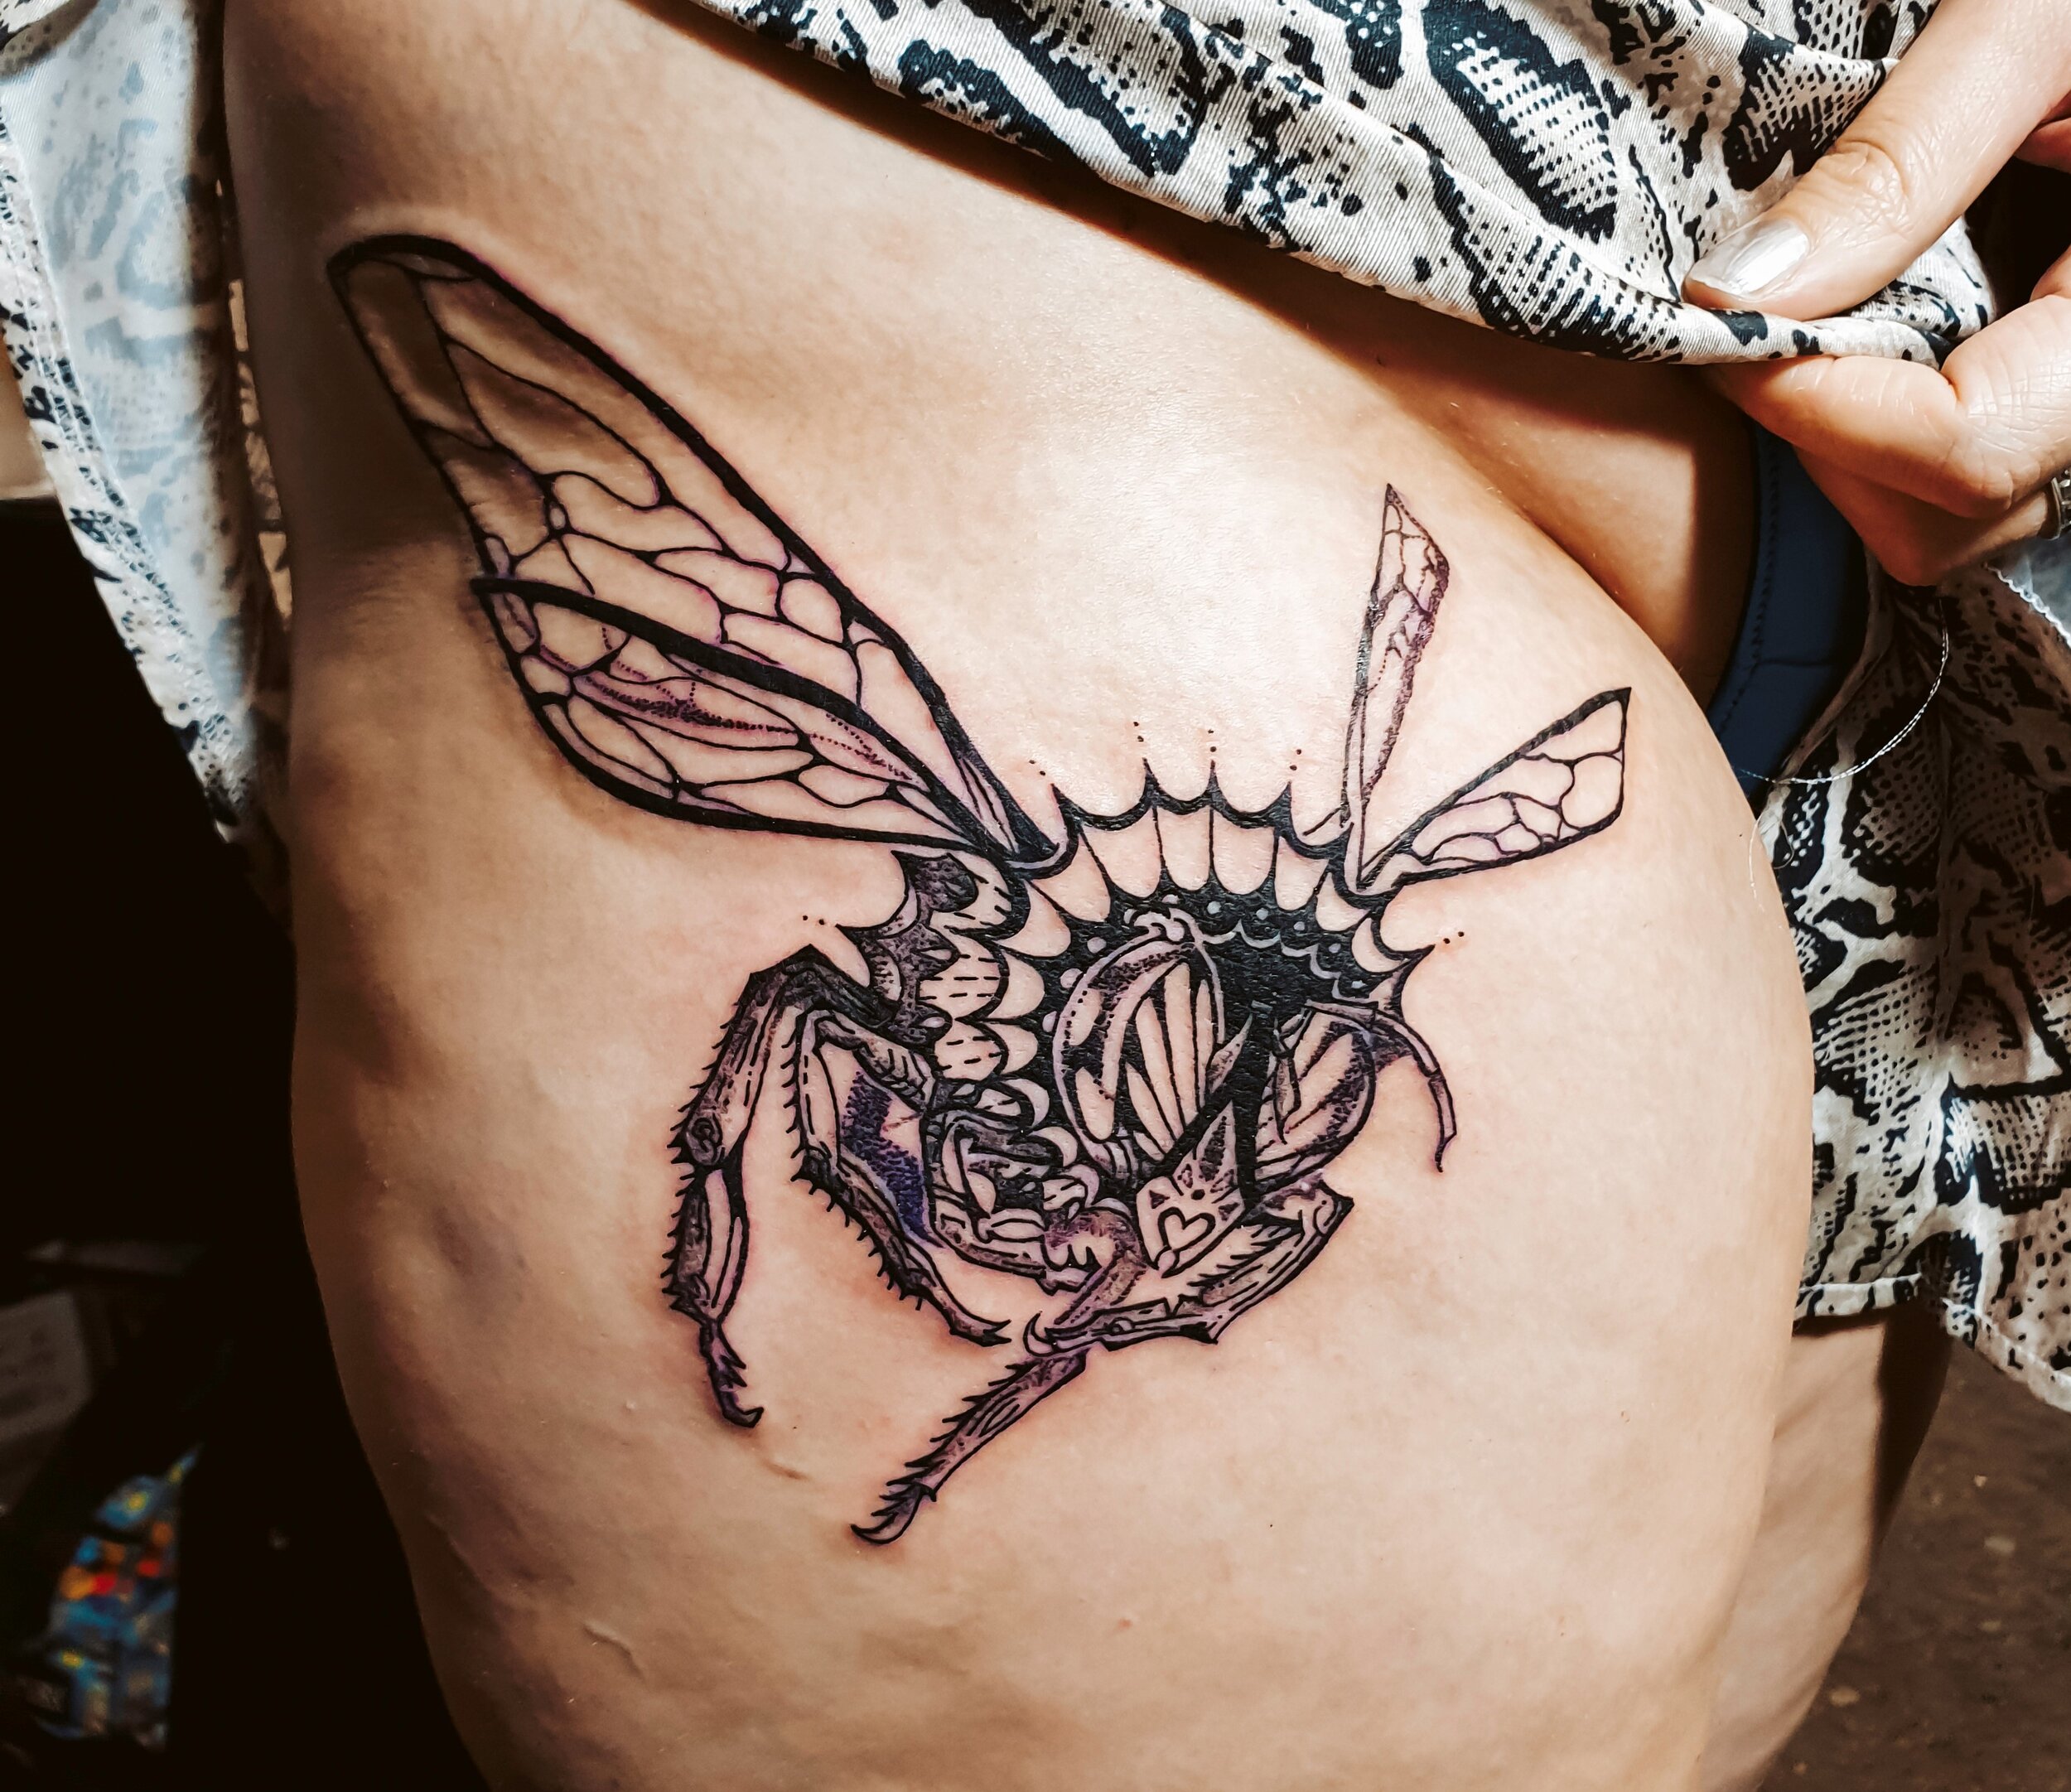 6 Irritating Things That People With Tattoos Love To Do  Thought Catalog